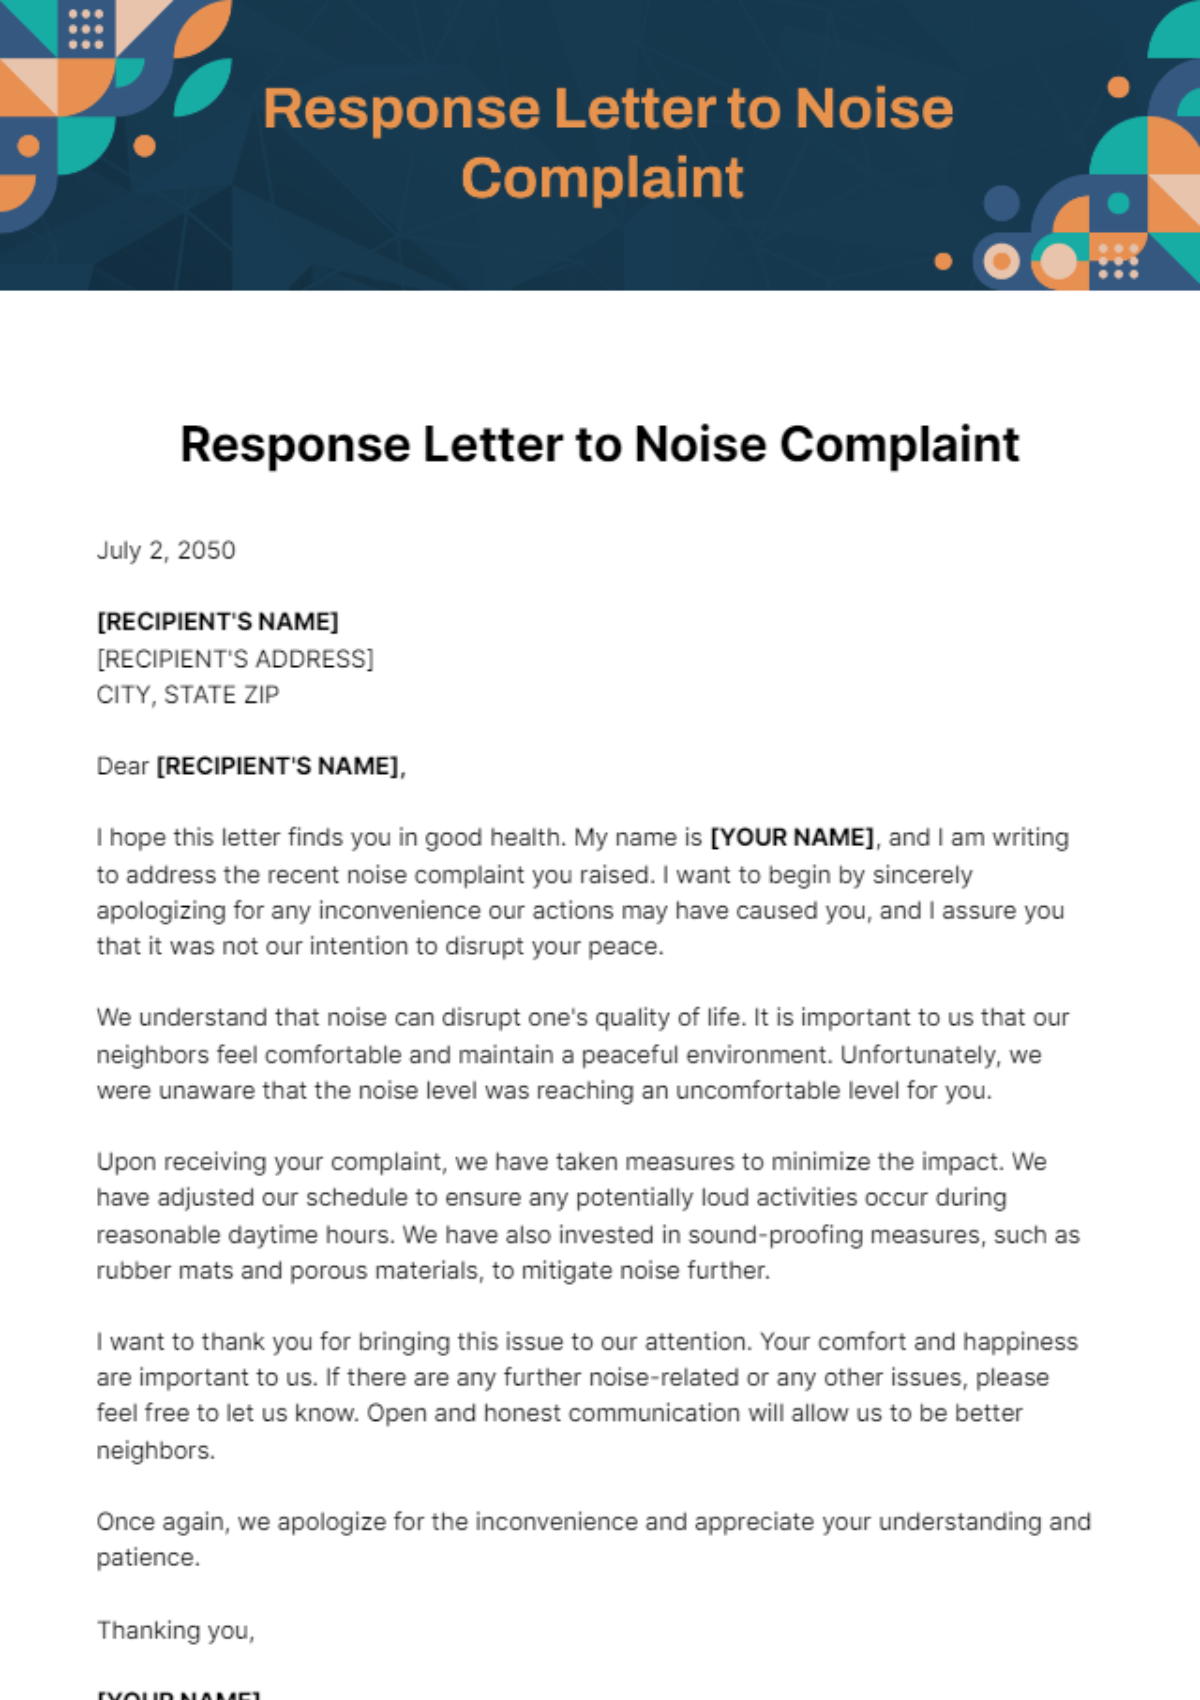 Free Response Letter to Noise Complaint Template